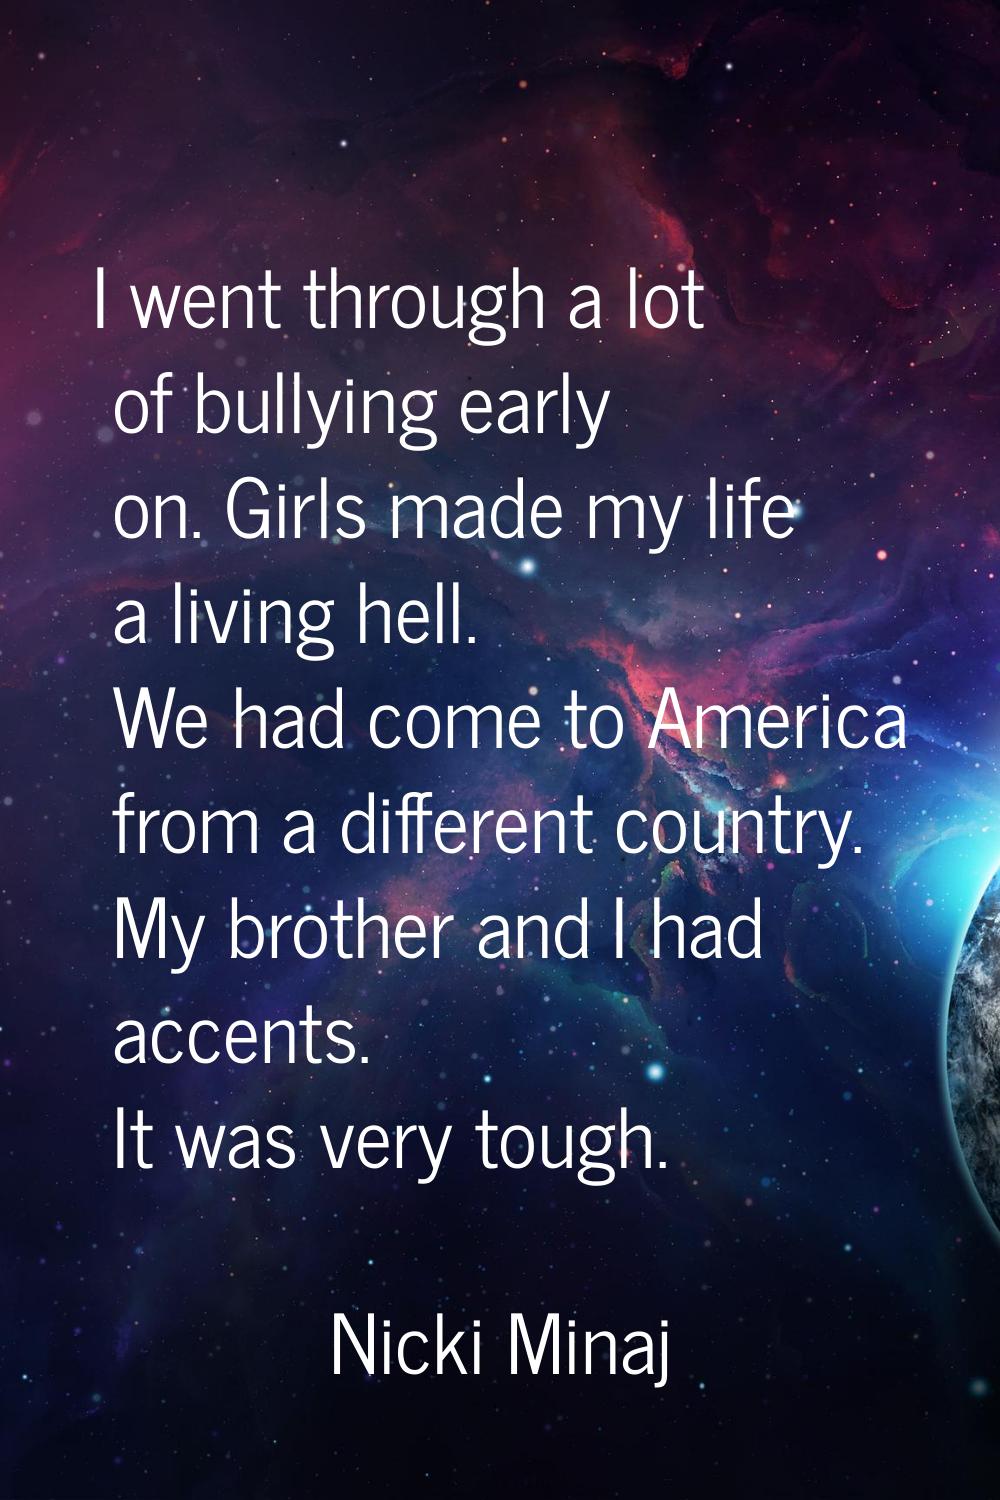 I went through a lot of bullying early on. Girls made my life a living hell. We had come to America